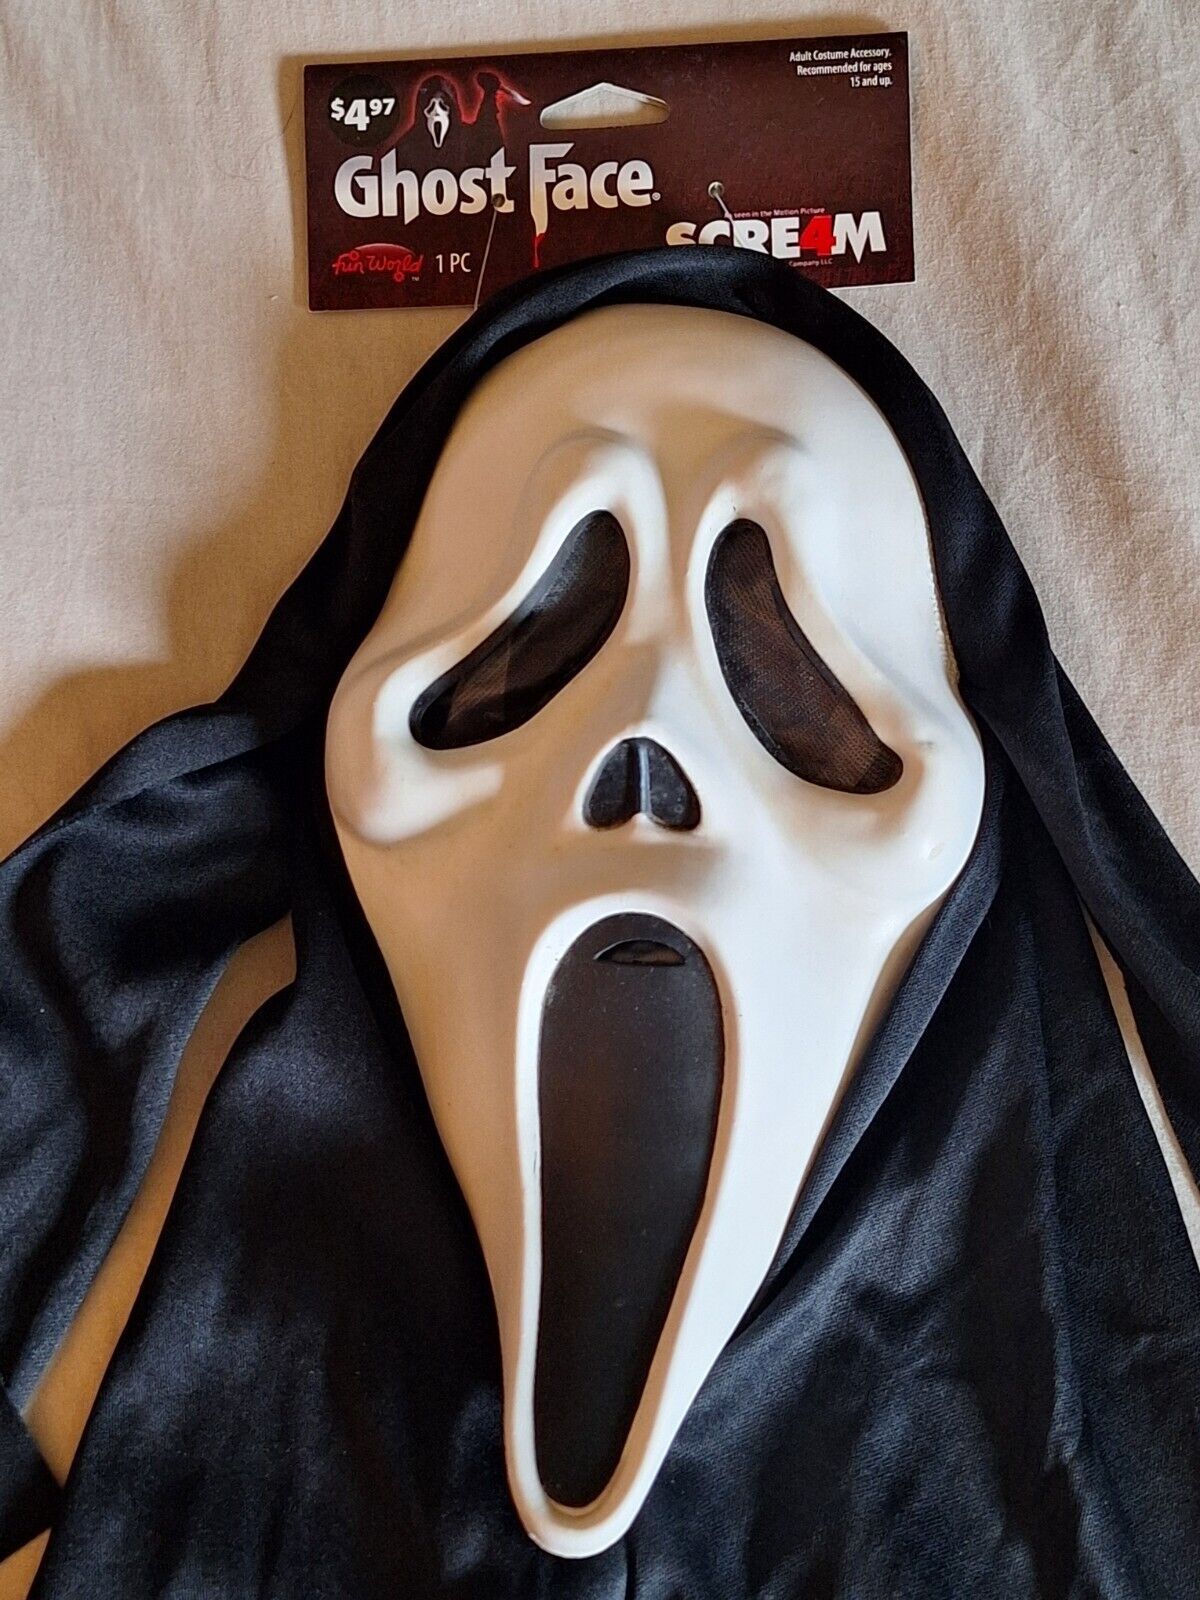 Scream 4 Ghost Face Reshoot TD Mask Tagged EU 2012 Ghostface Easter Unlimited